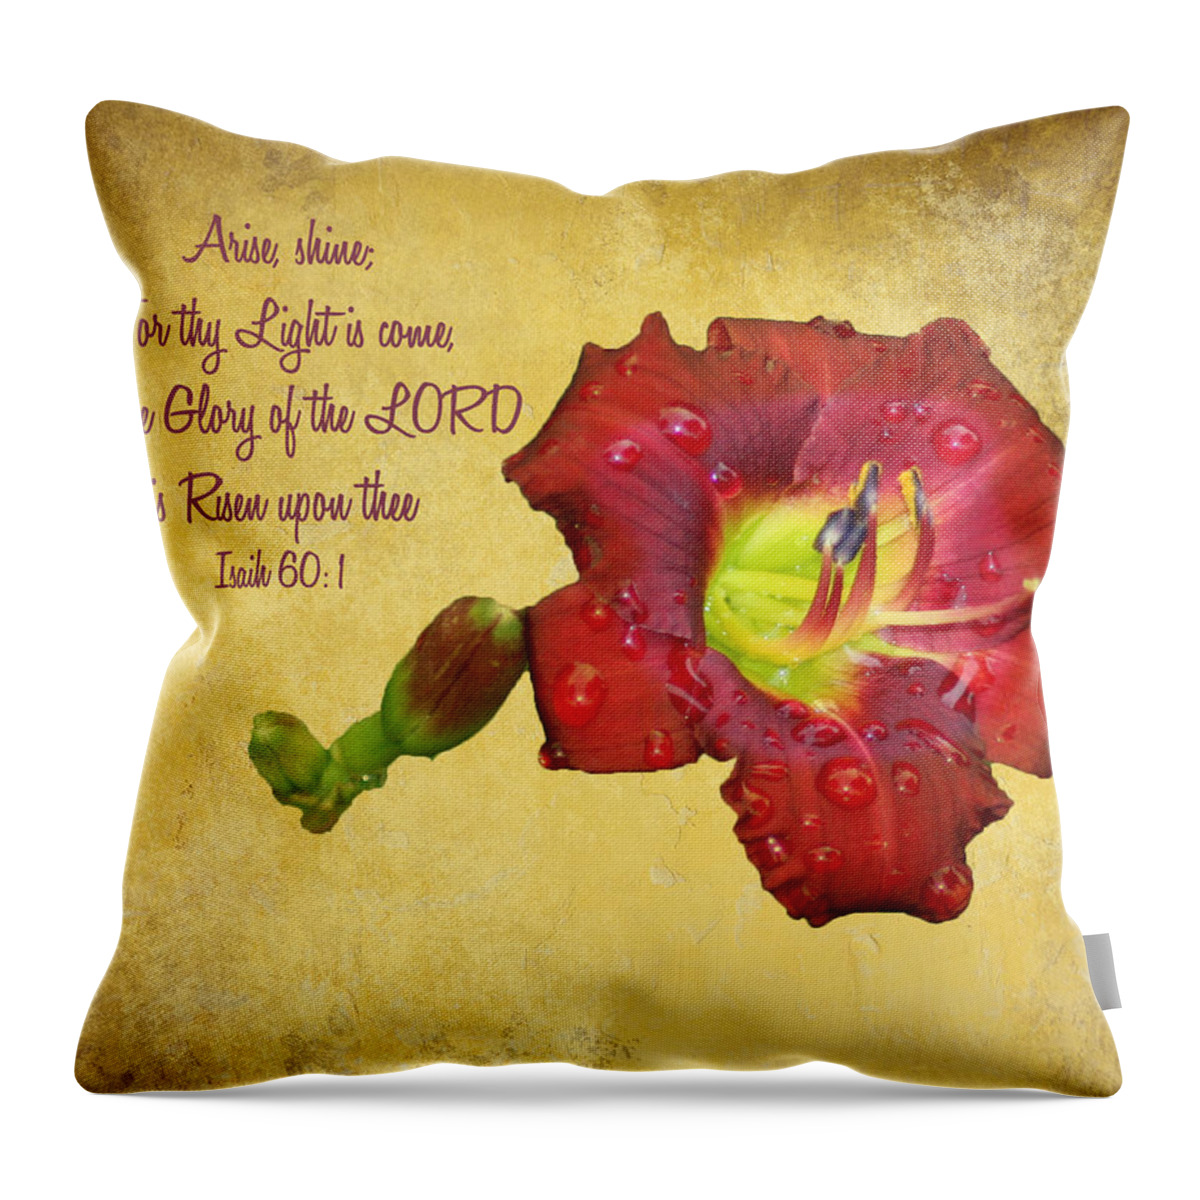 Flower Throw Pillow featuring the photograph Arise Shine by Bill Barber